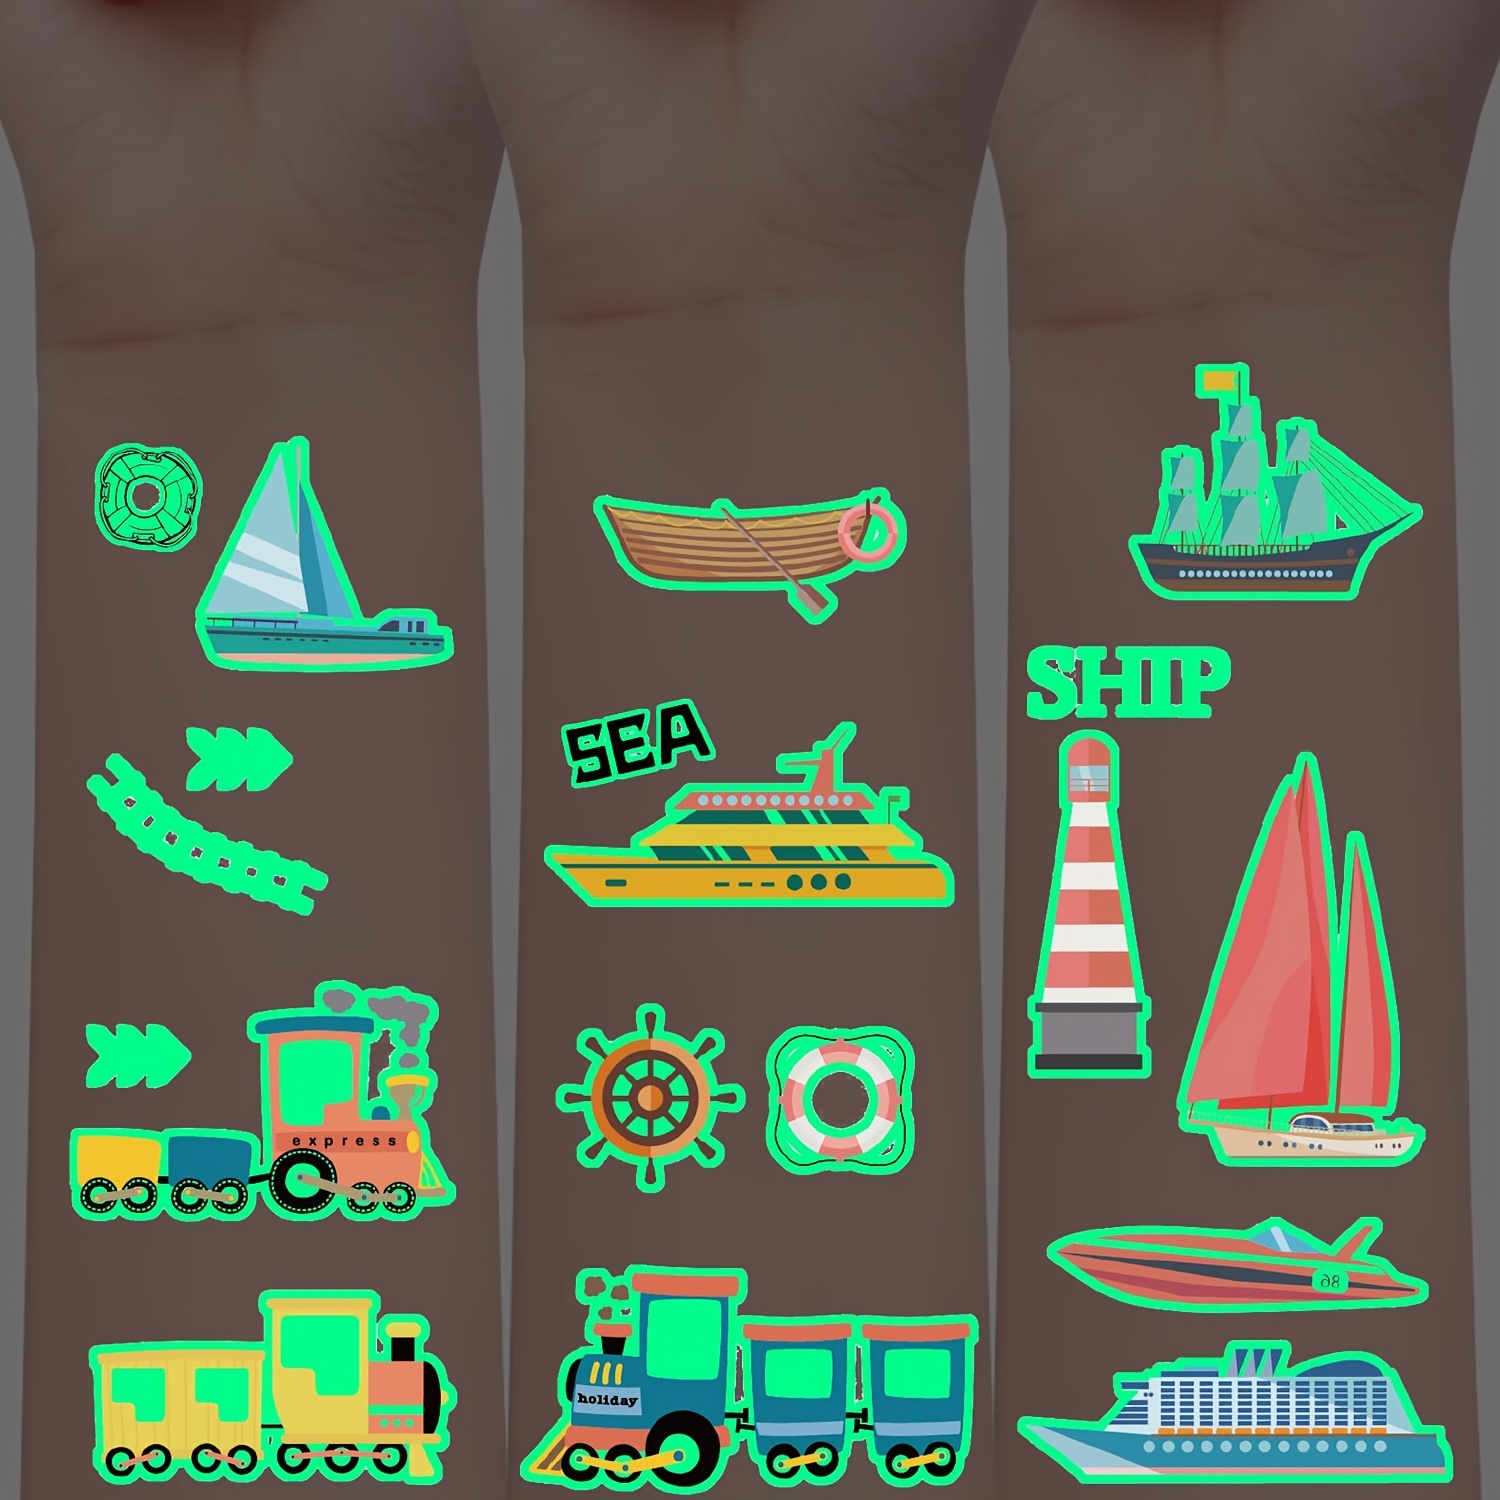 

Glow-in-the-dark Temporary Tattoos, 10 Sheets Assorted Train, Sailboat, Cruise Ship, Speedboat Designs, Cartoon Fun Stickers, Waterproof Body Arm Art Tattoos, Lasts 2-5 Days, Other Shapes